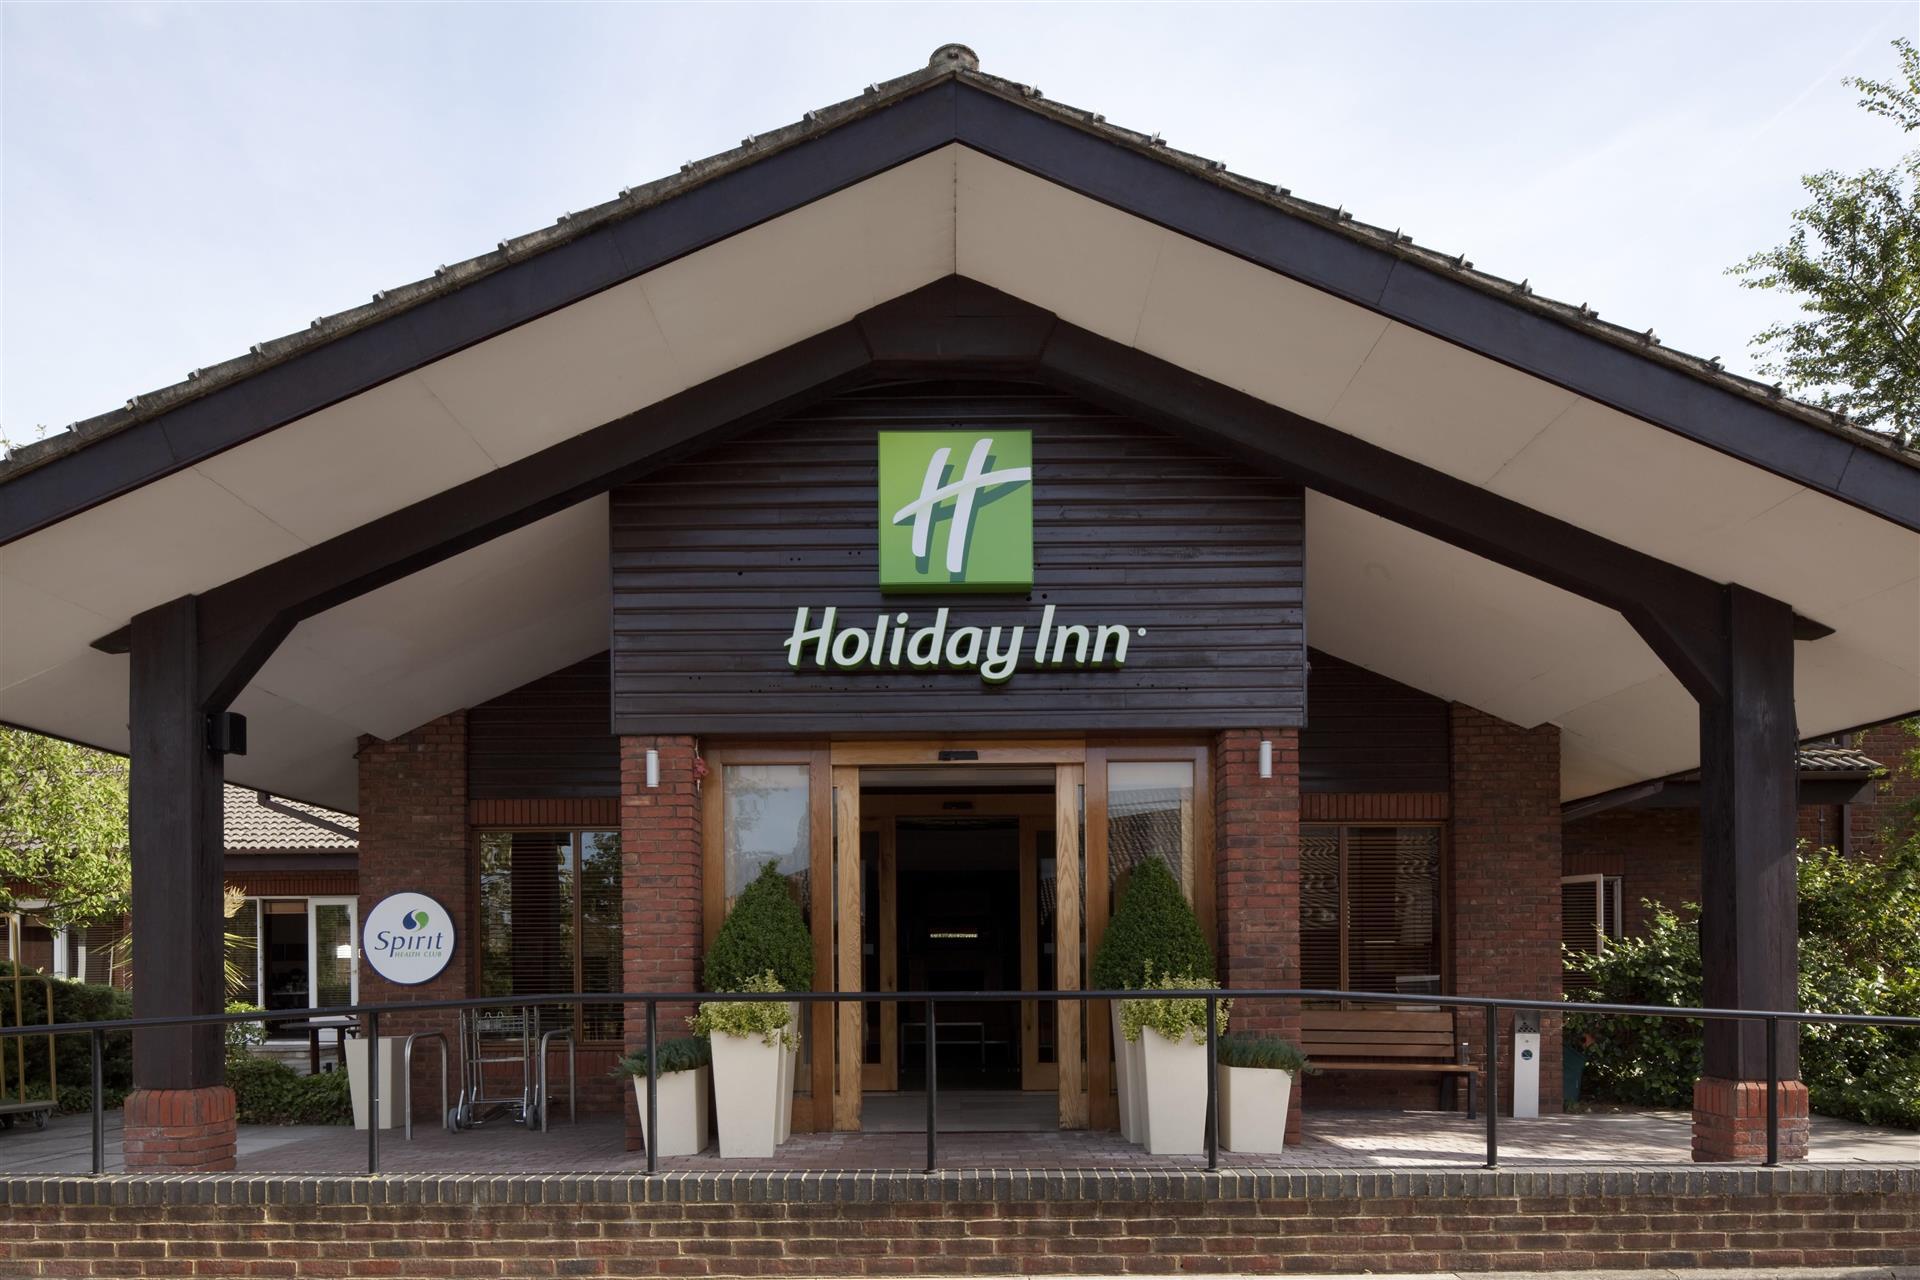 Holiday Inn Guildford in Southampton, GB1